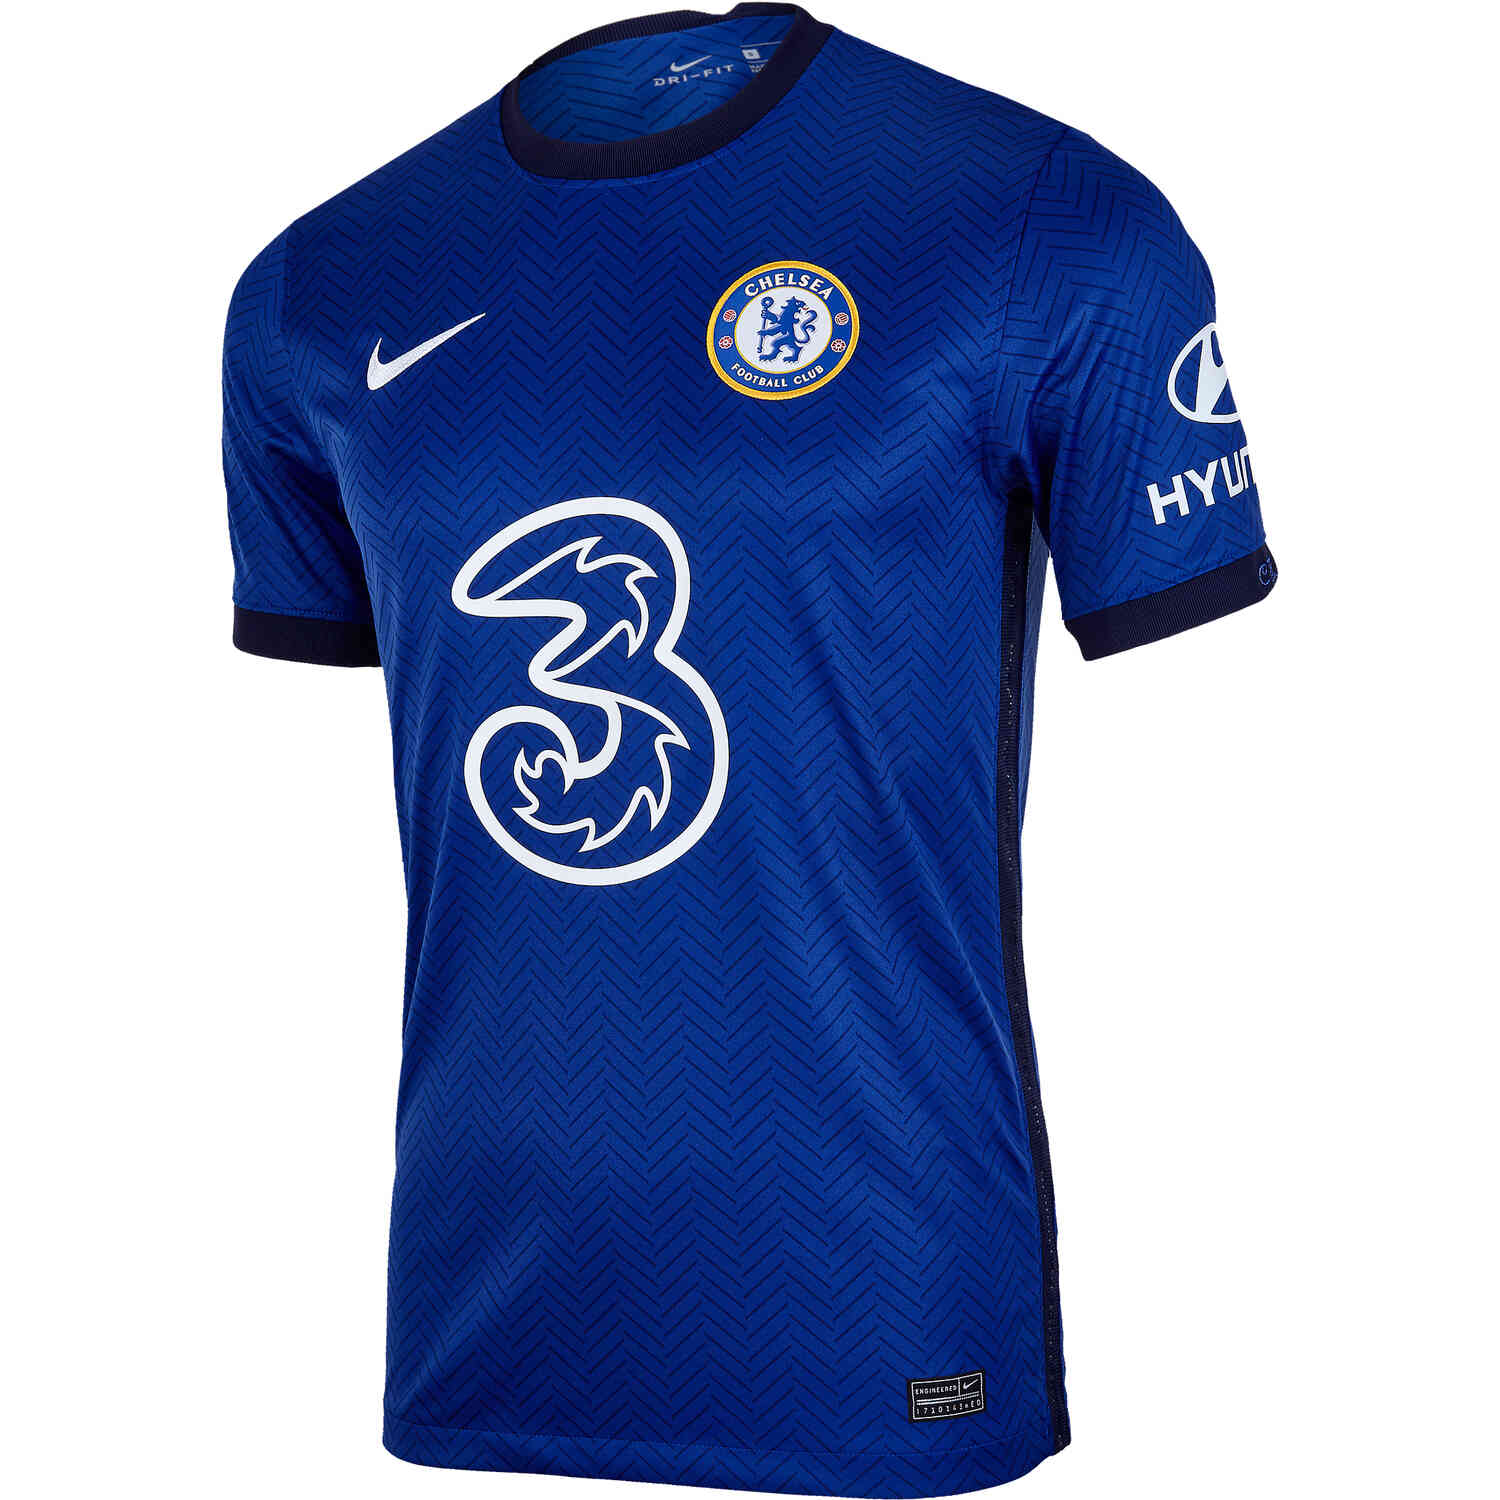 2020/21 Nike Chelsea Home Jersey 